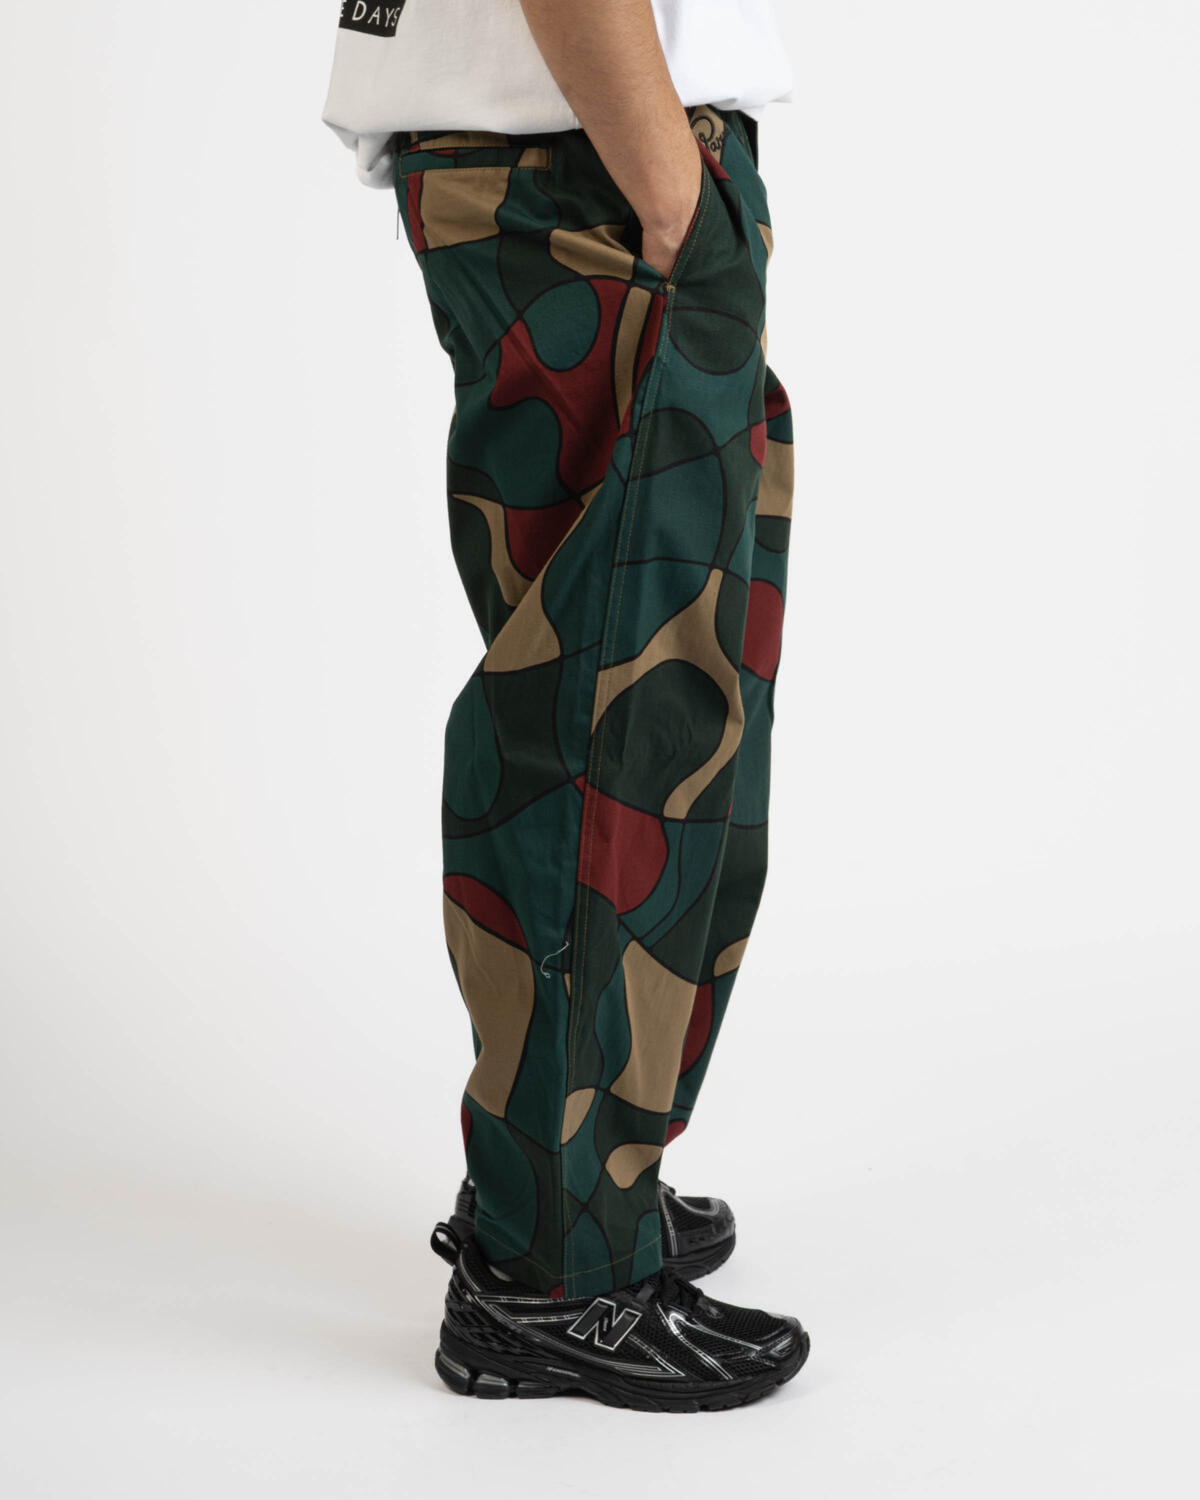 by Parra Trees in Wind Relaxed Pants Camo Green / Medium